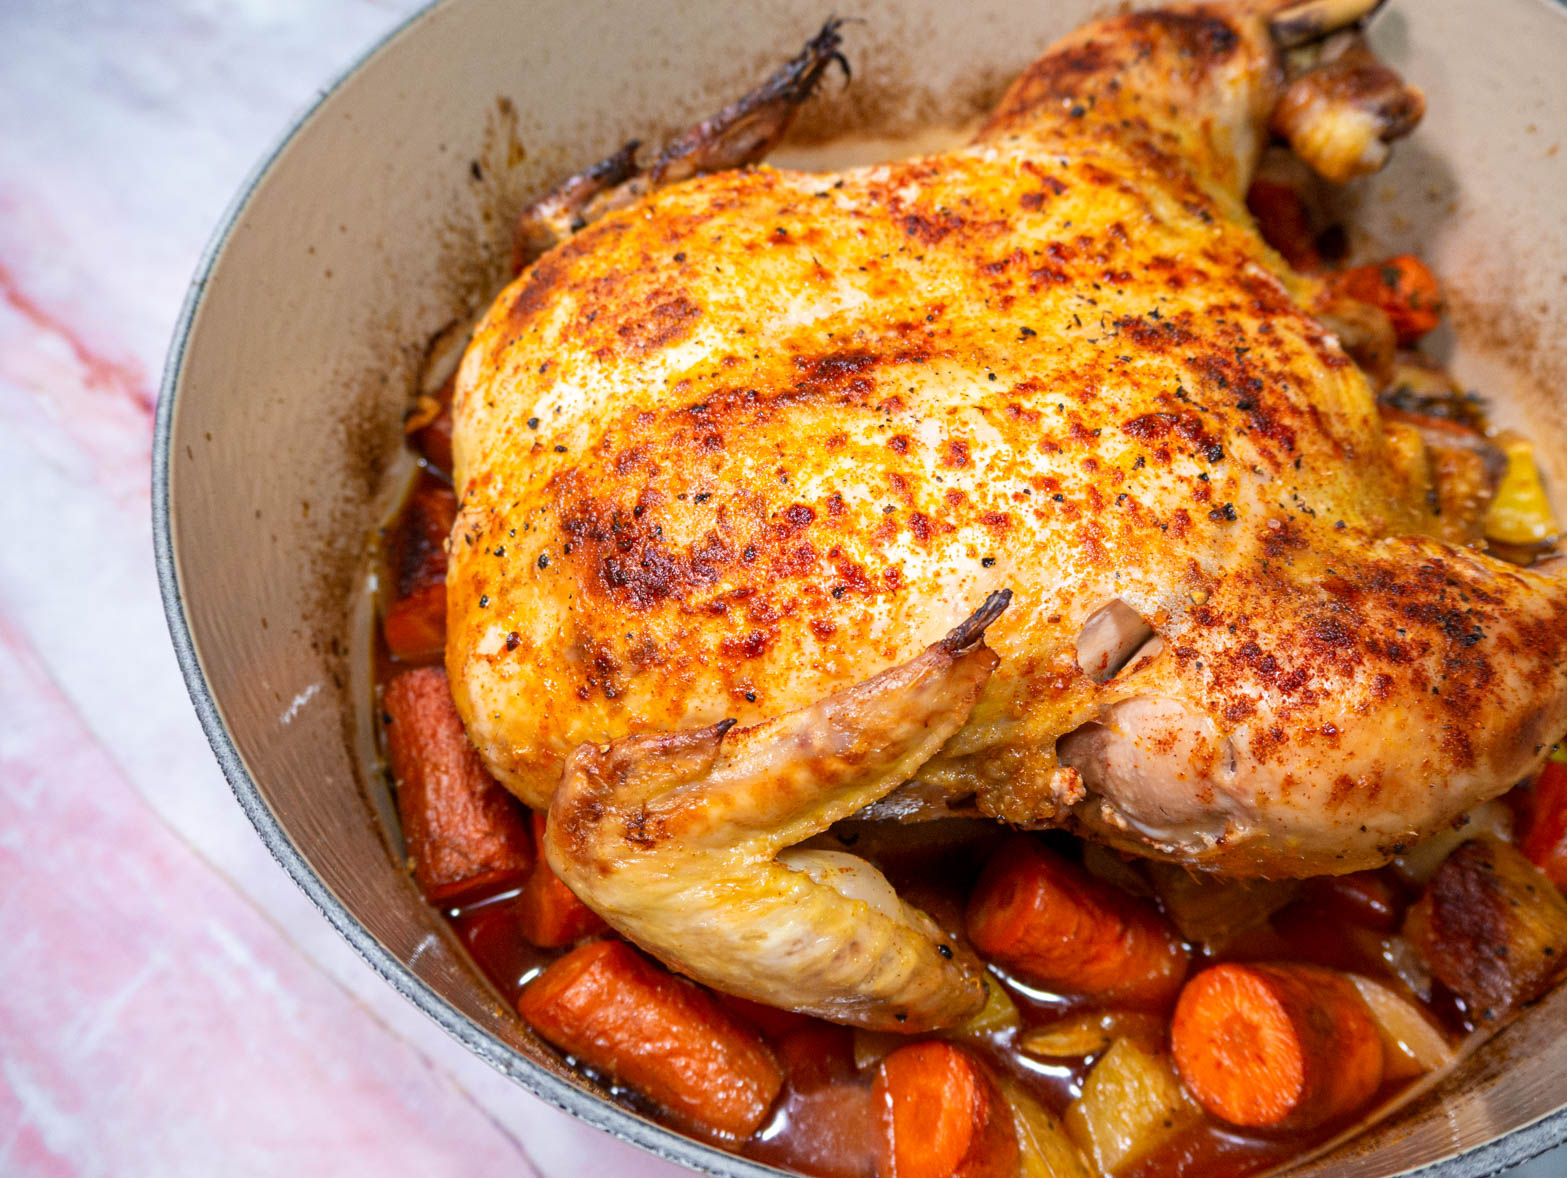 A Whole Roasted Chicken Dinner in a Dutch Oven